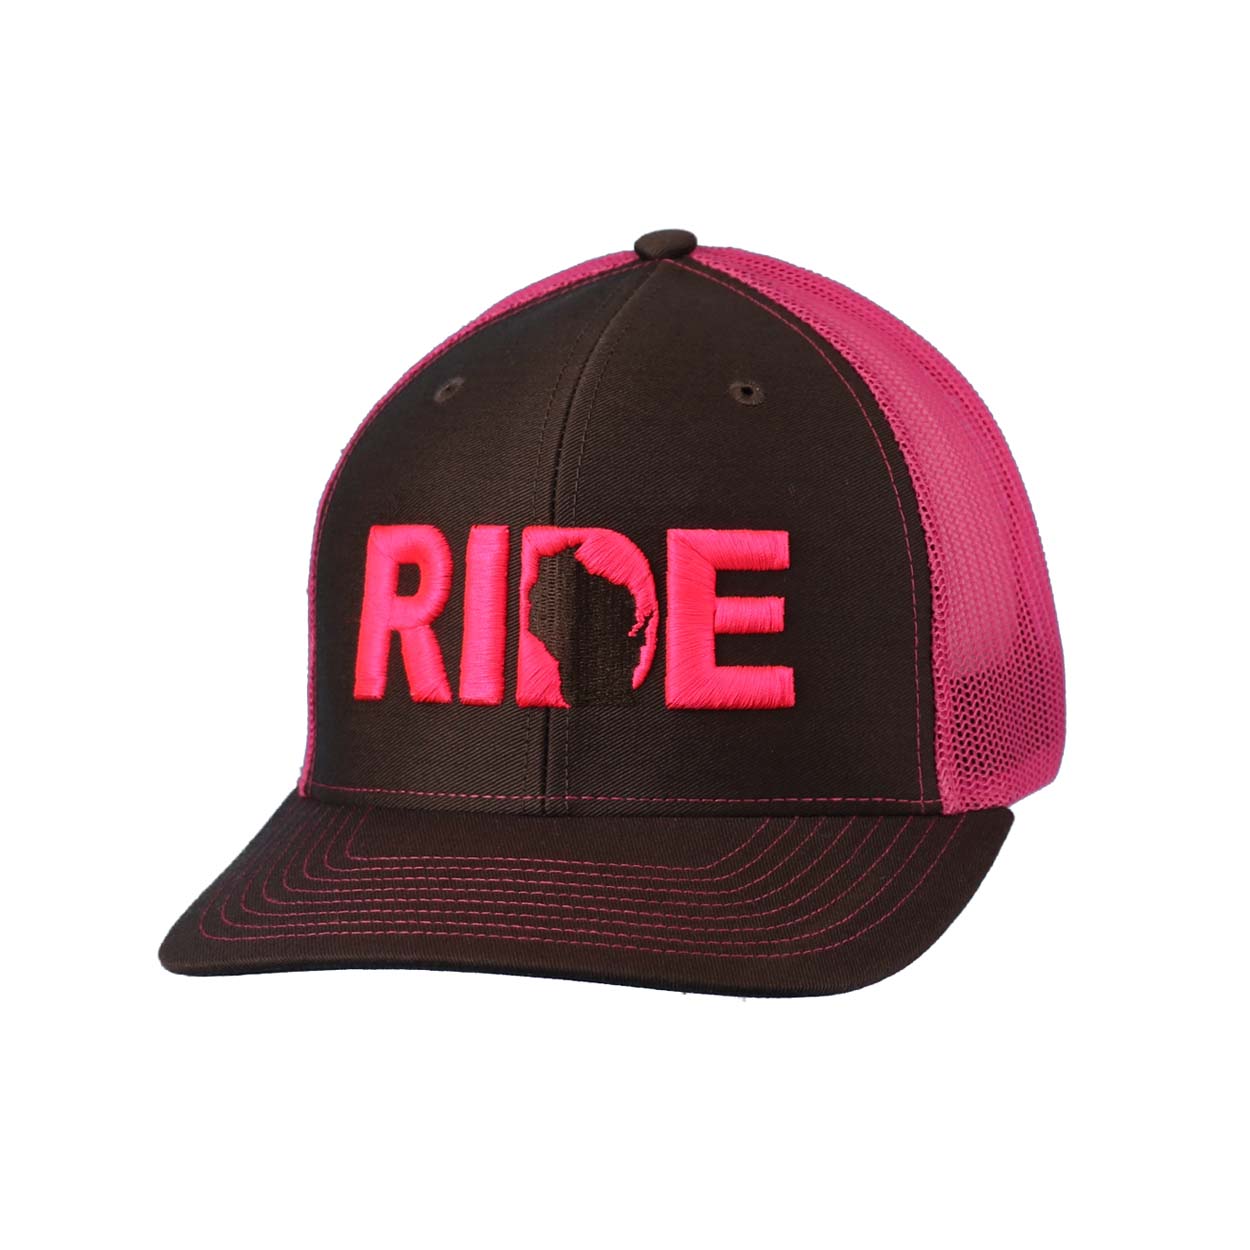 Ride Wisconsin Classic Embroidered Snapback Trucker Hat Charcoal/Pink